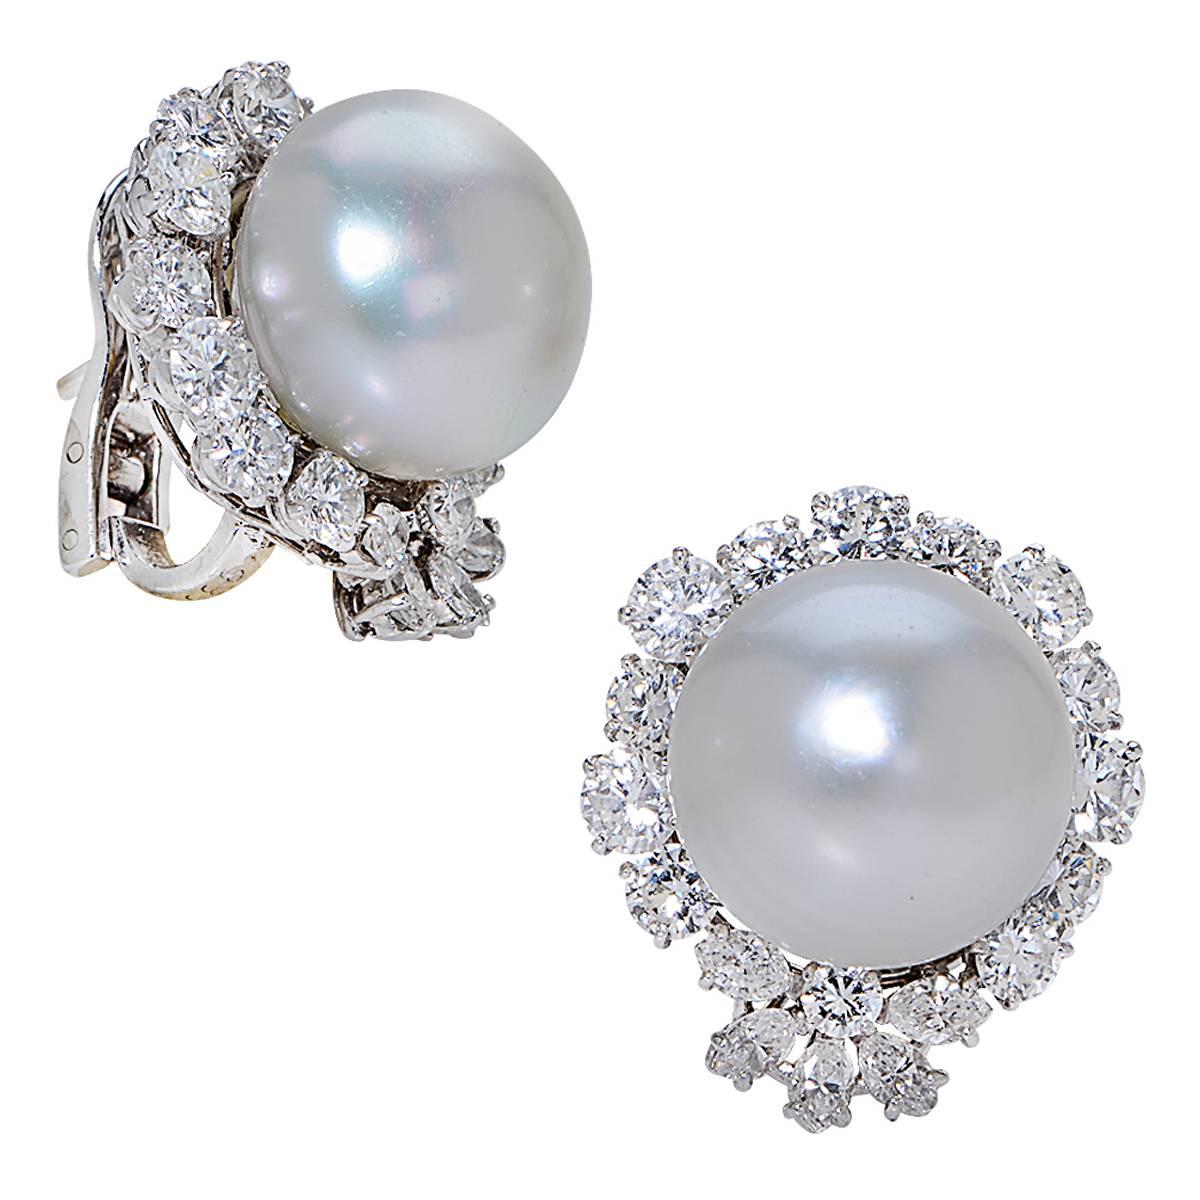 Van Cleef & Arpels Platinum Earrings Containing a Matched Pair of 15-15.5mm South Sea Pearls Surrounded by 22 Round Brilliant Cut Diamonds Weighing Approximately 4.80 Carats and 14 Marquise Cut Diamonds Weighing Approximately .70 Carats, F Color, VS